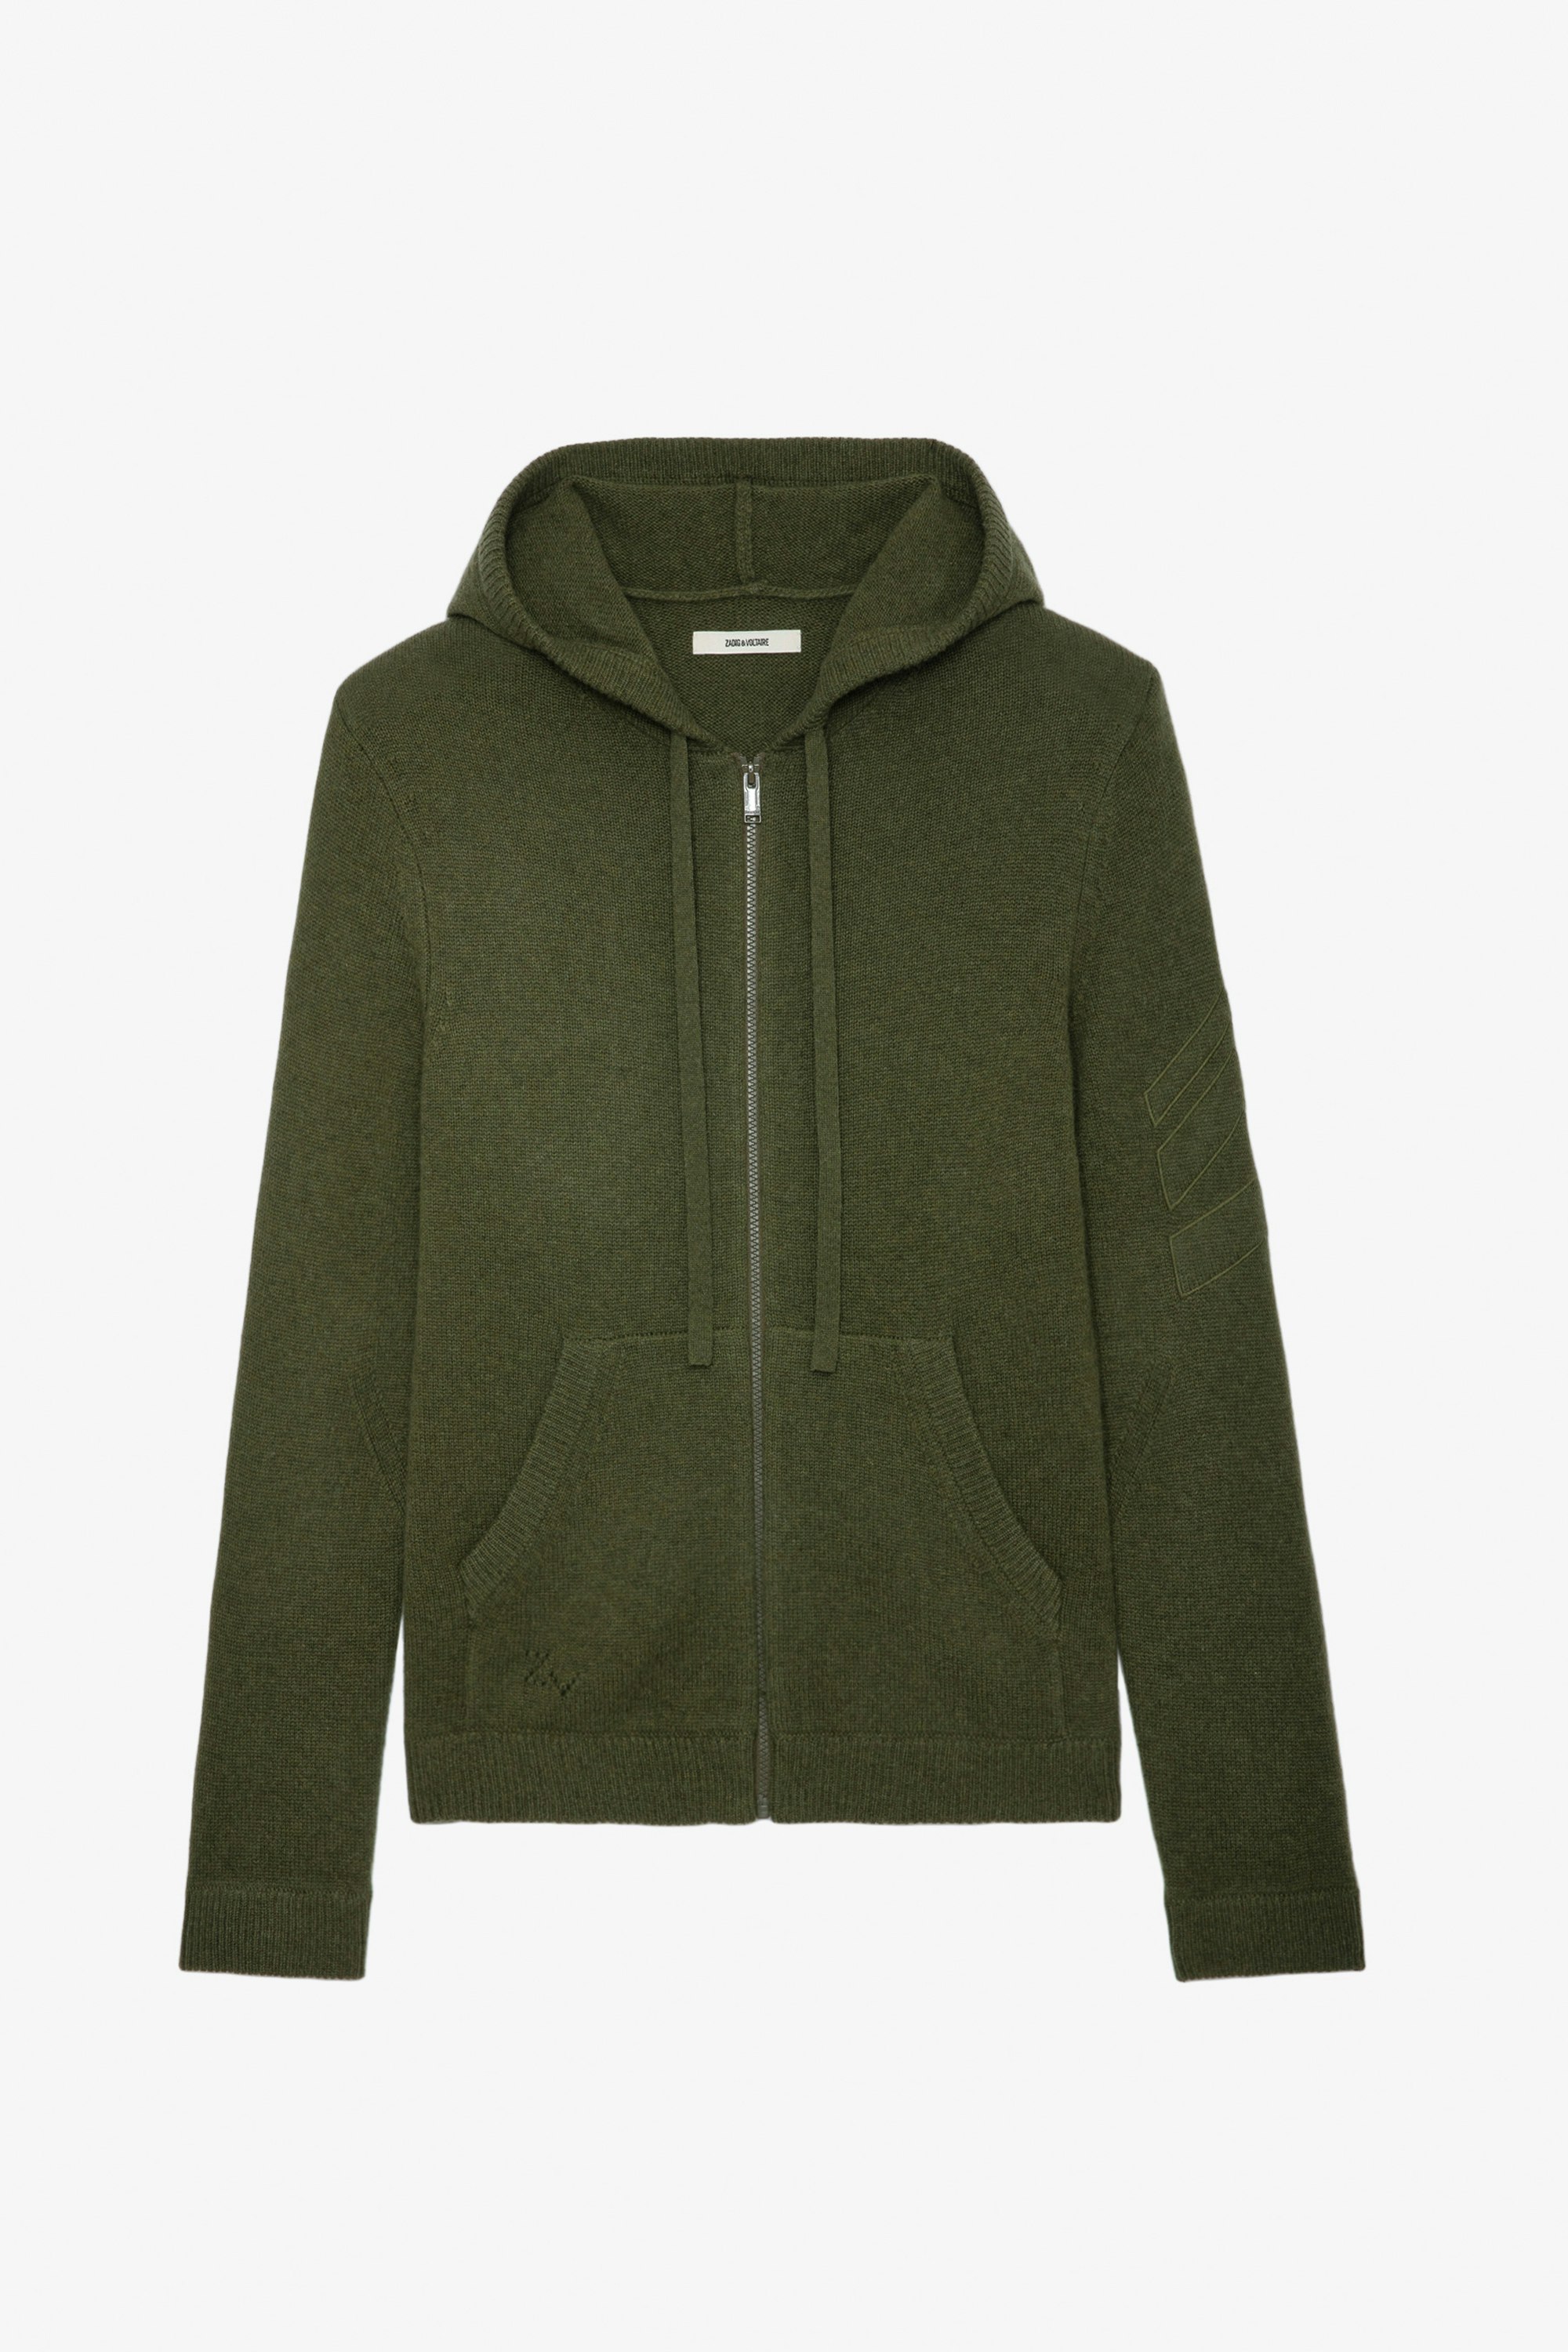 Clash Cashmere Cardigan - Men’s khaki cashmere hooded zip-up cardigan with arrows.